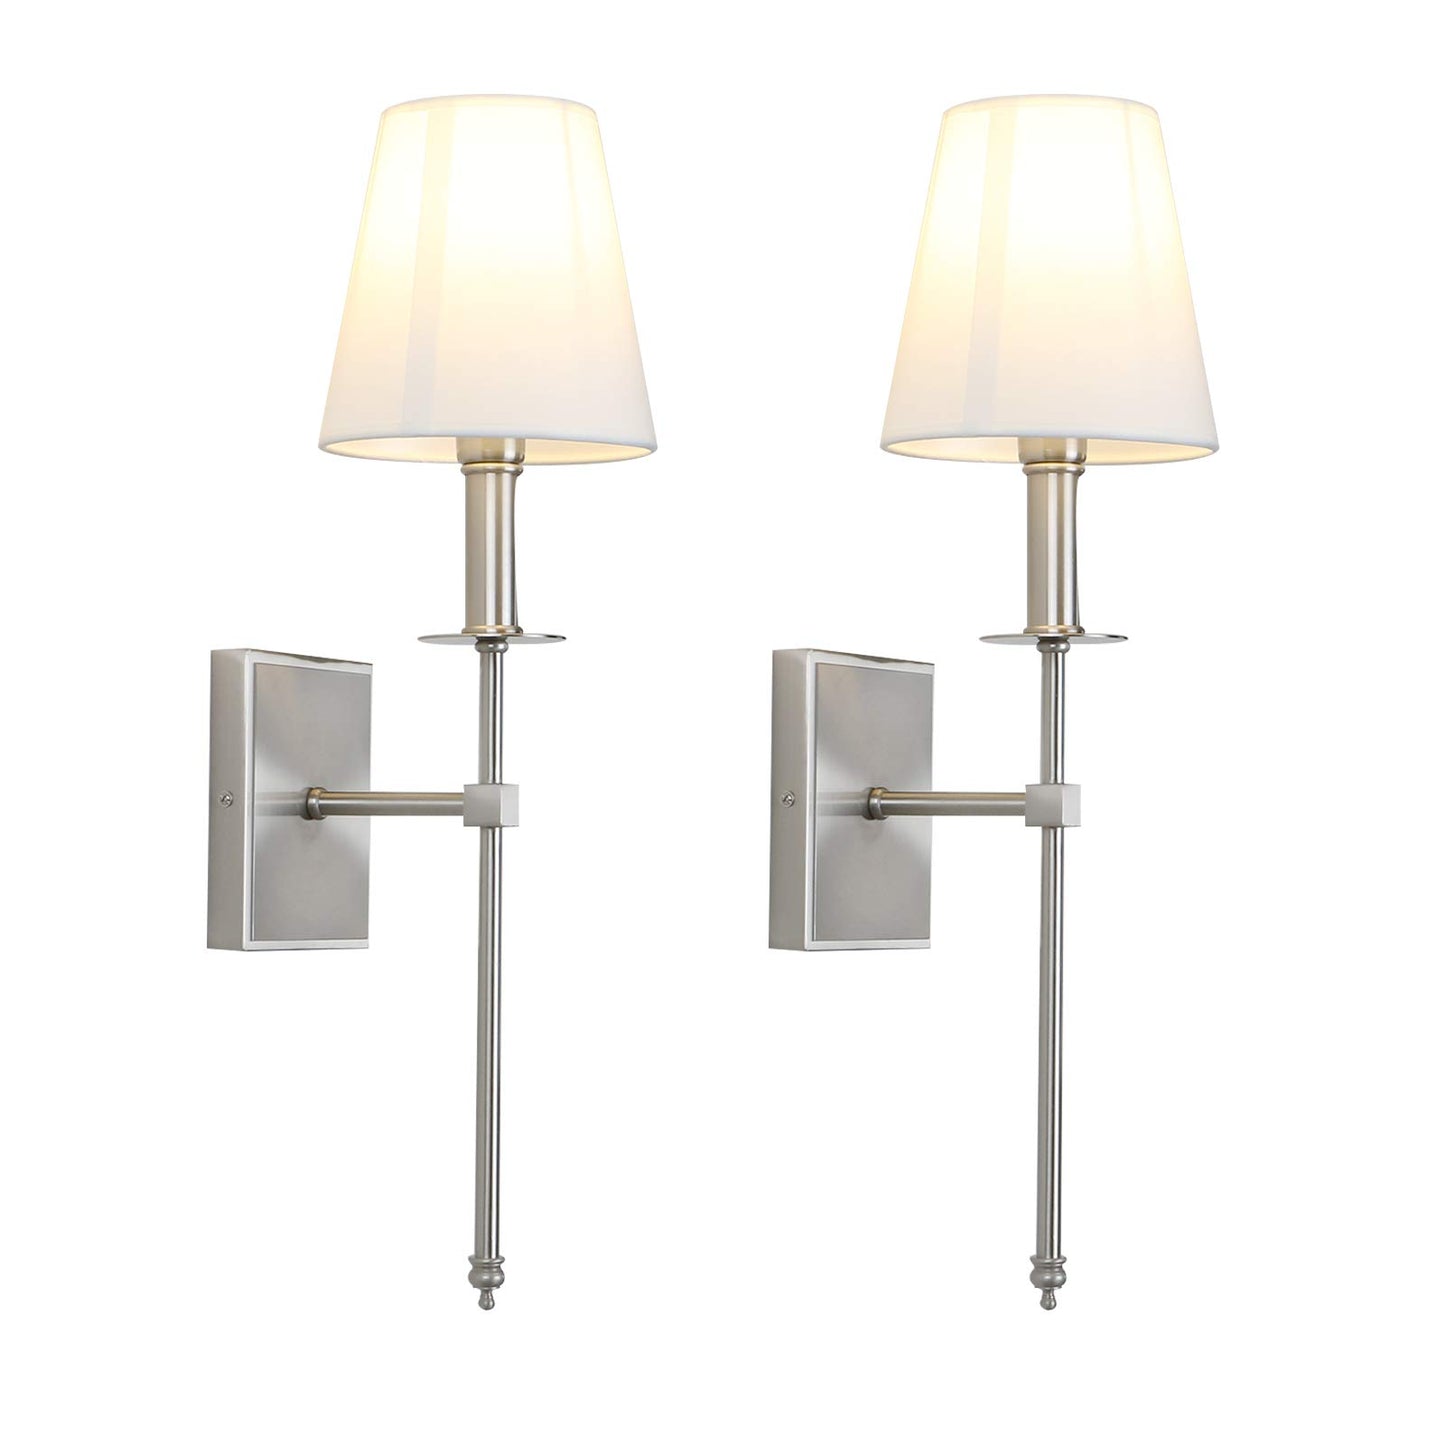 Set of 2 Classic Rustic Industrial Wall Sconce Lighting Fixture